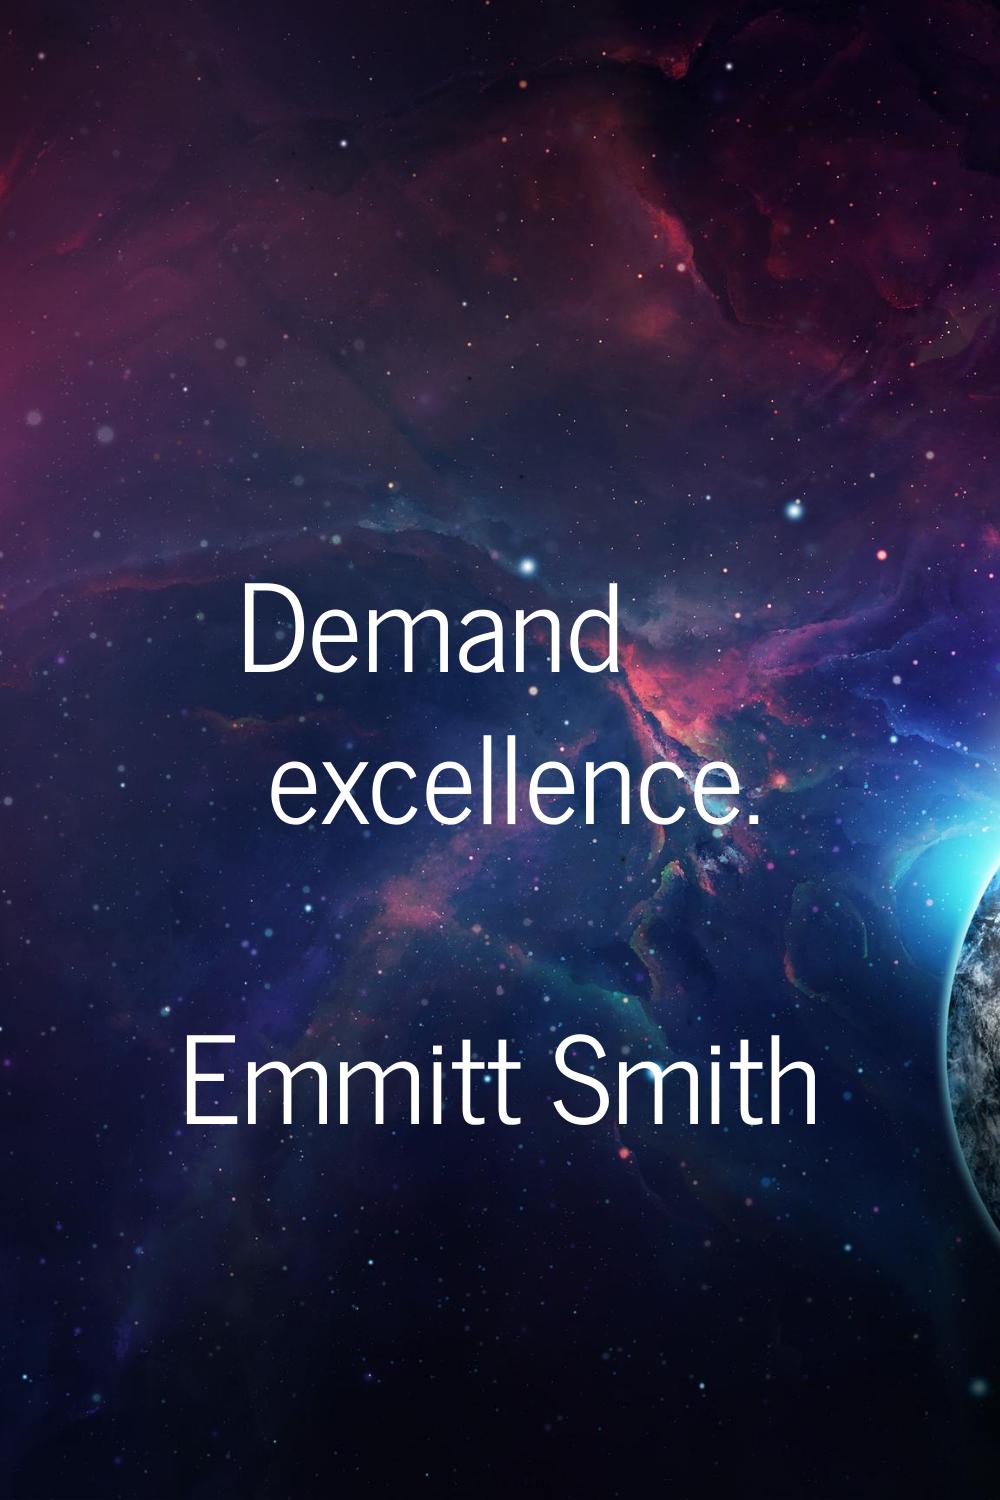 Demand excellence.